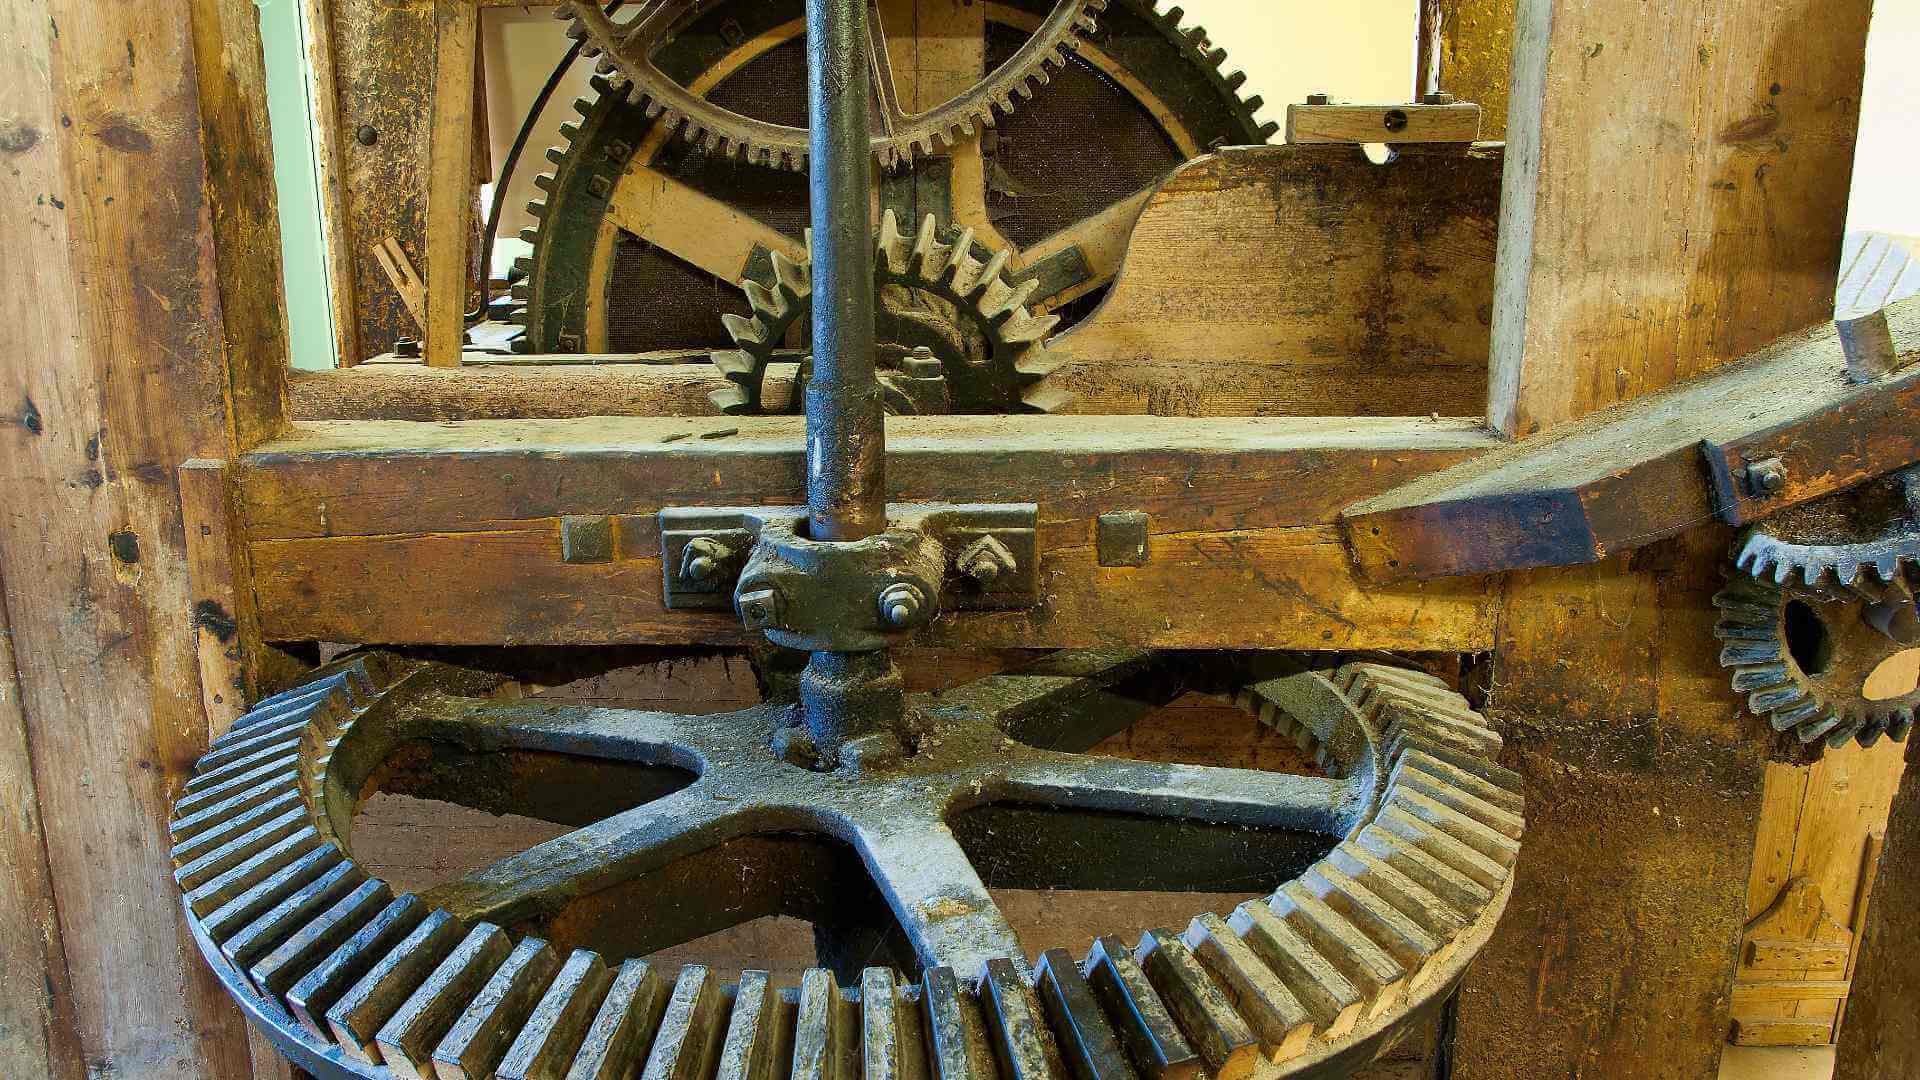 Cogs and Wheel